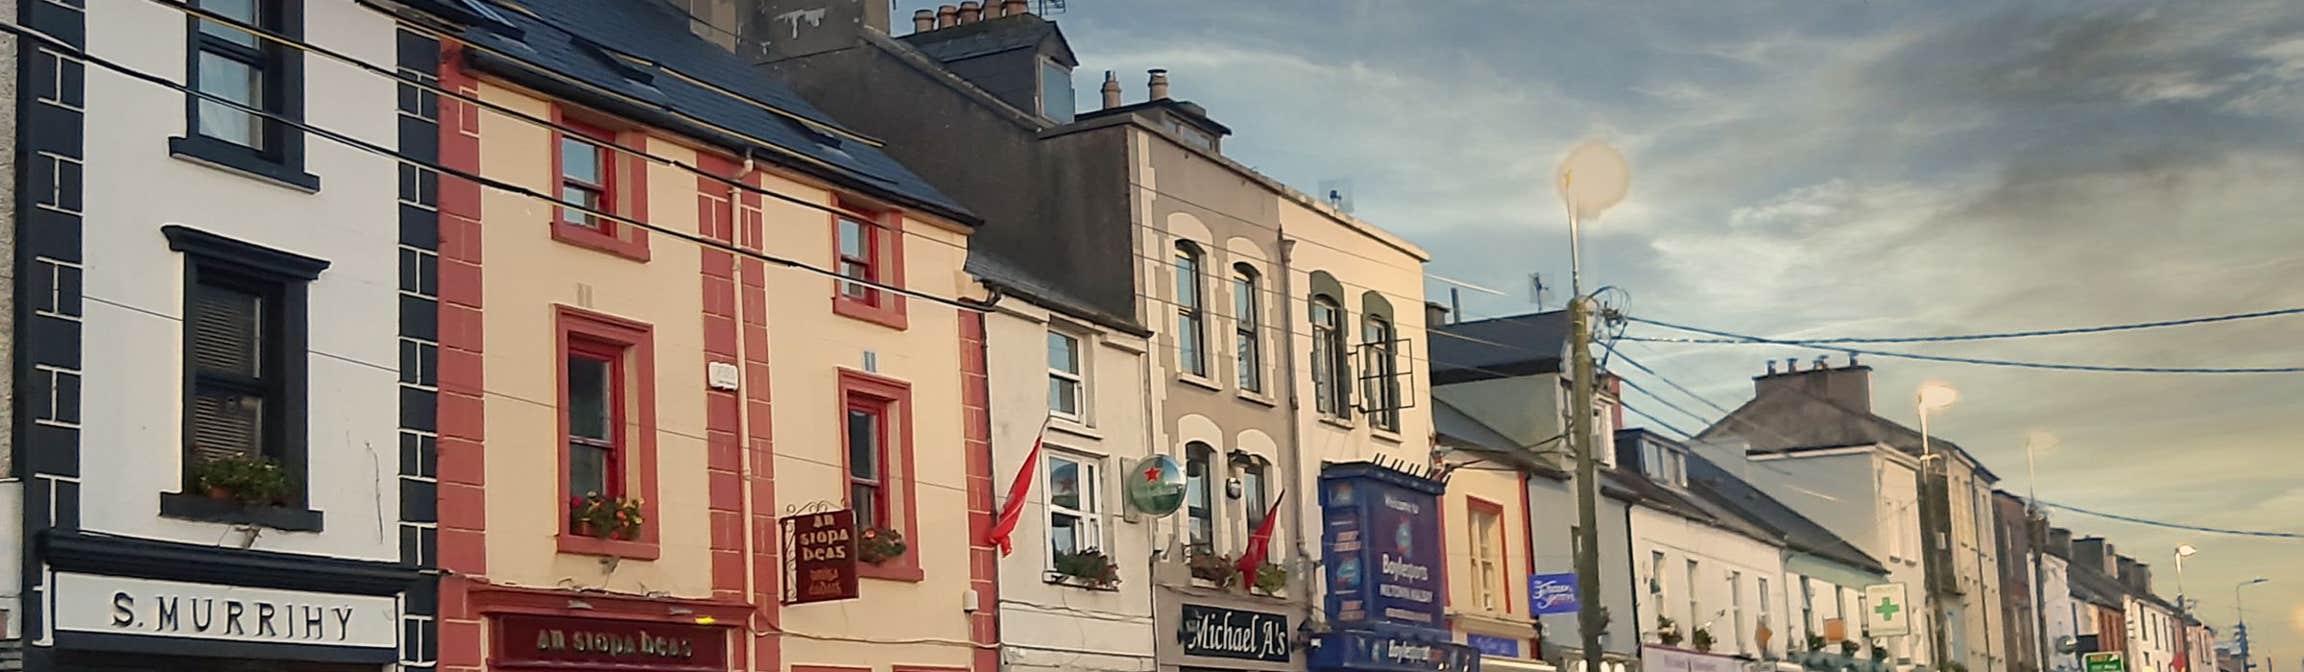 Image of Miltown Malbay town in County Clare